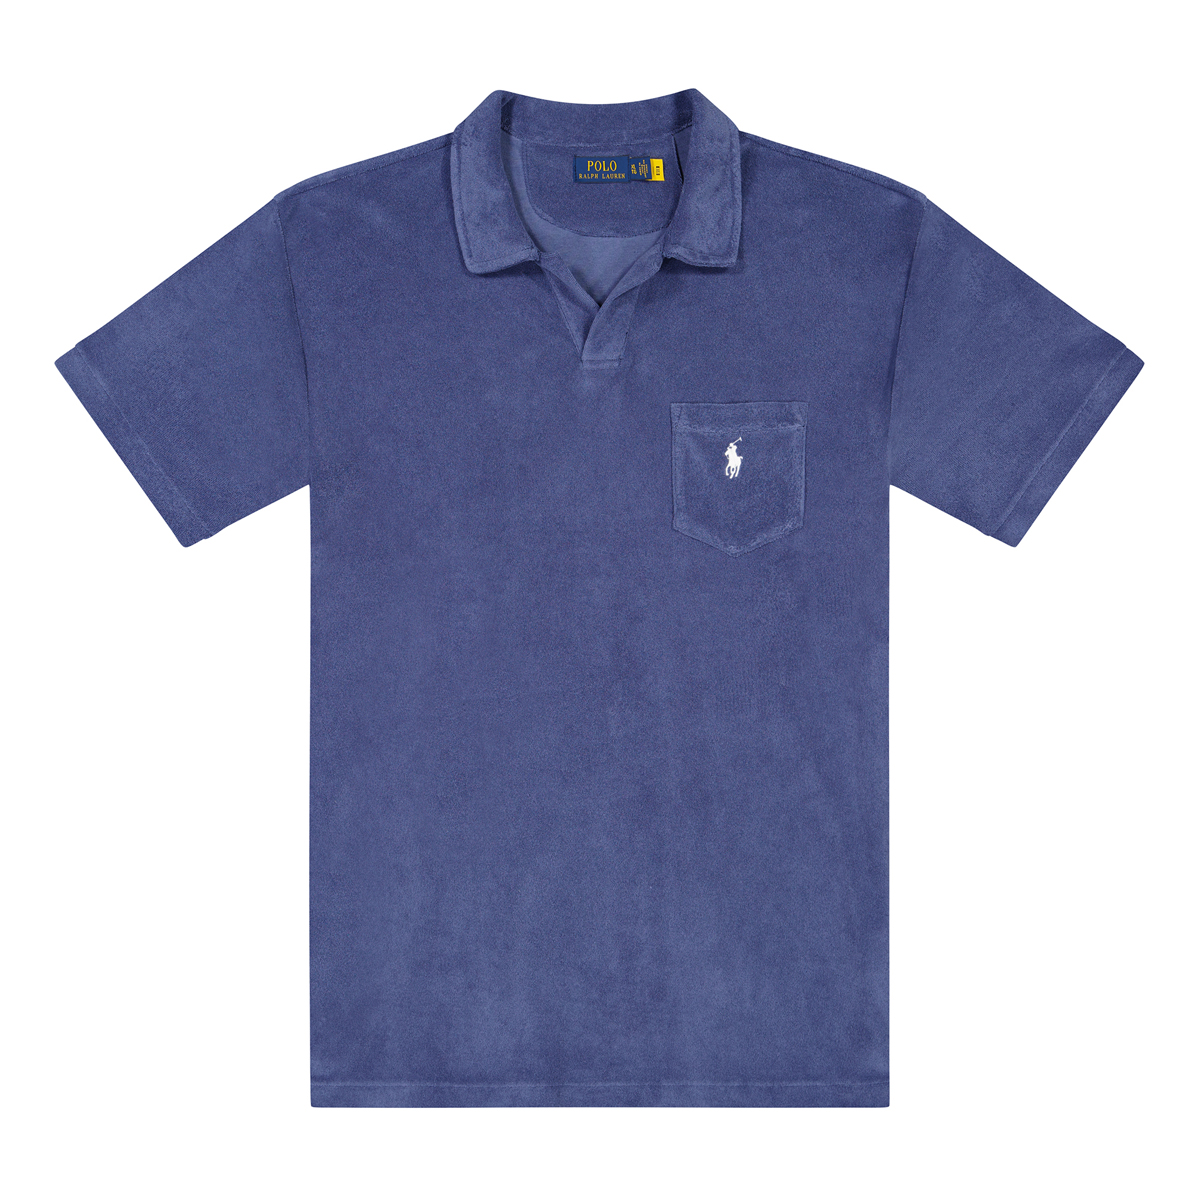 Polo Ralph Lauren Terry Towelling Polo, Light Navy